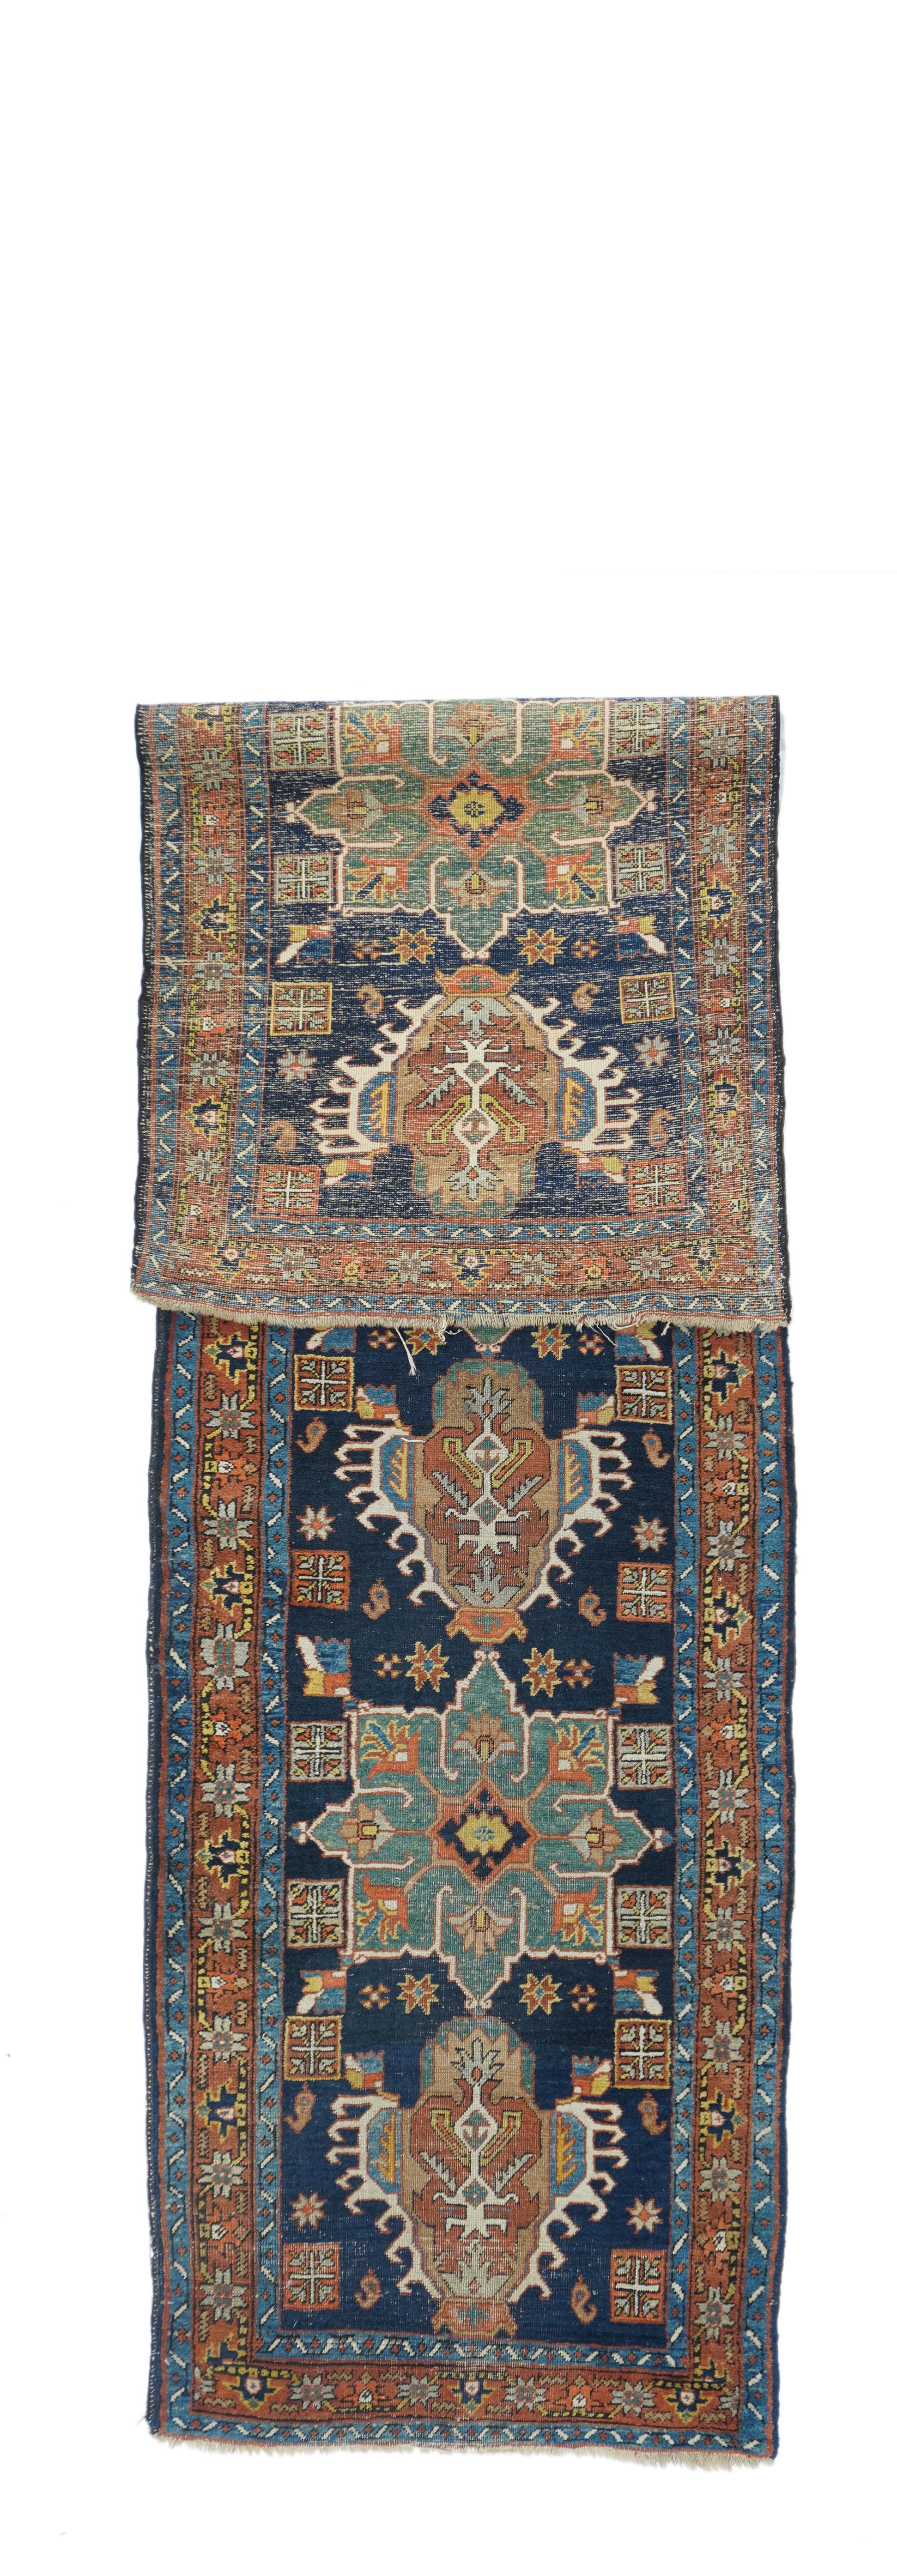 Antique Heriz runner 2'8'' x 10'8''. This classic NW Persian rustic Kenare (runner) shows the characteristic deep indigo ground decorated by seven alternating lea green octogrammes and red/ivory hooked 